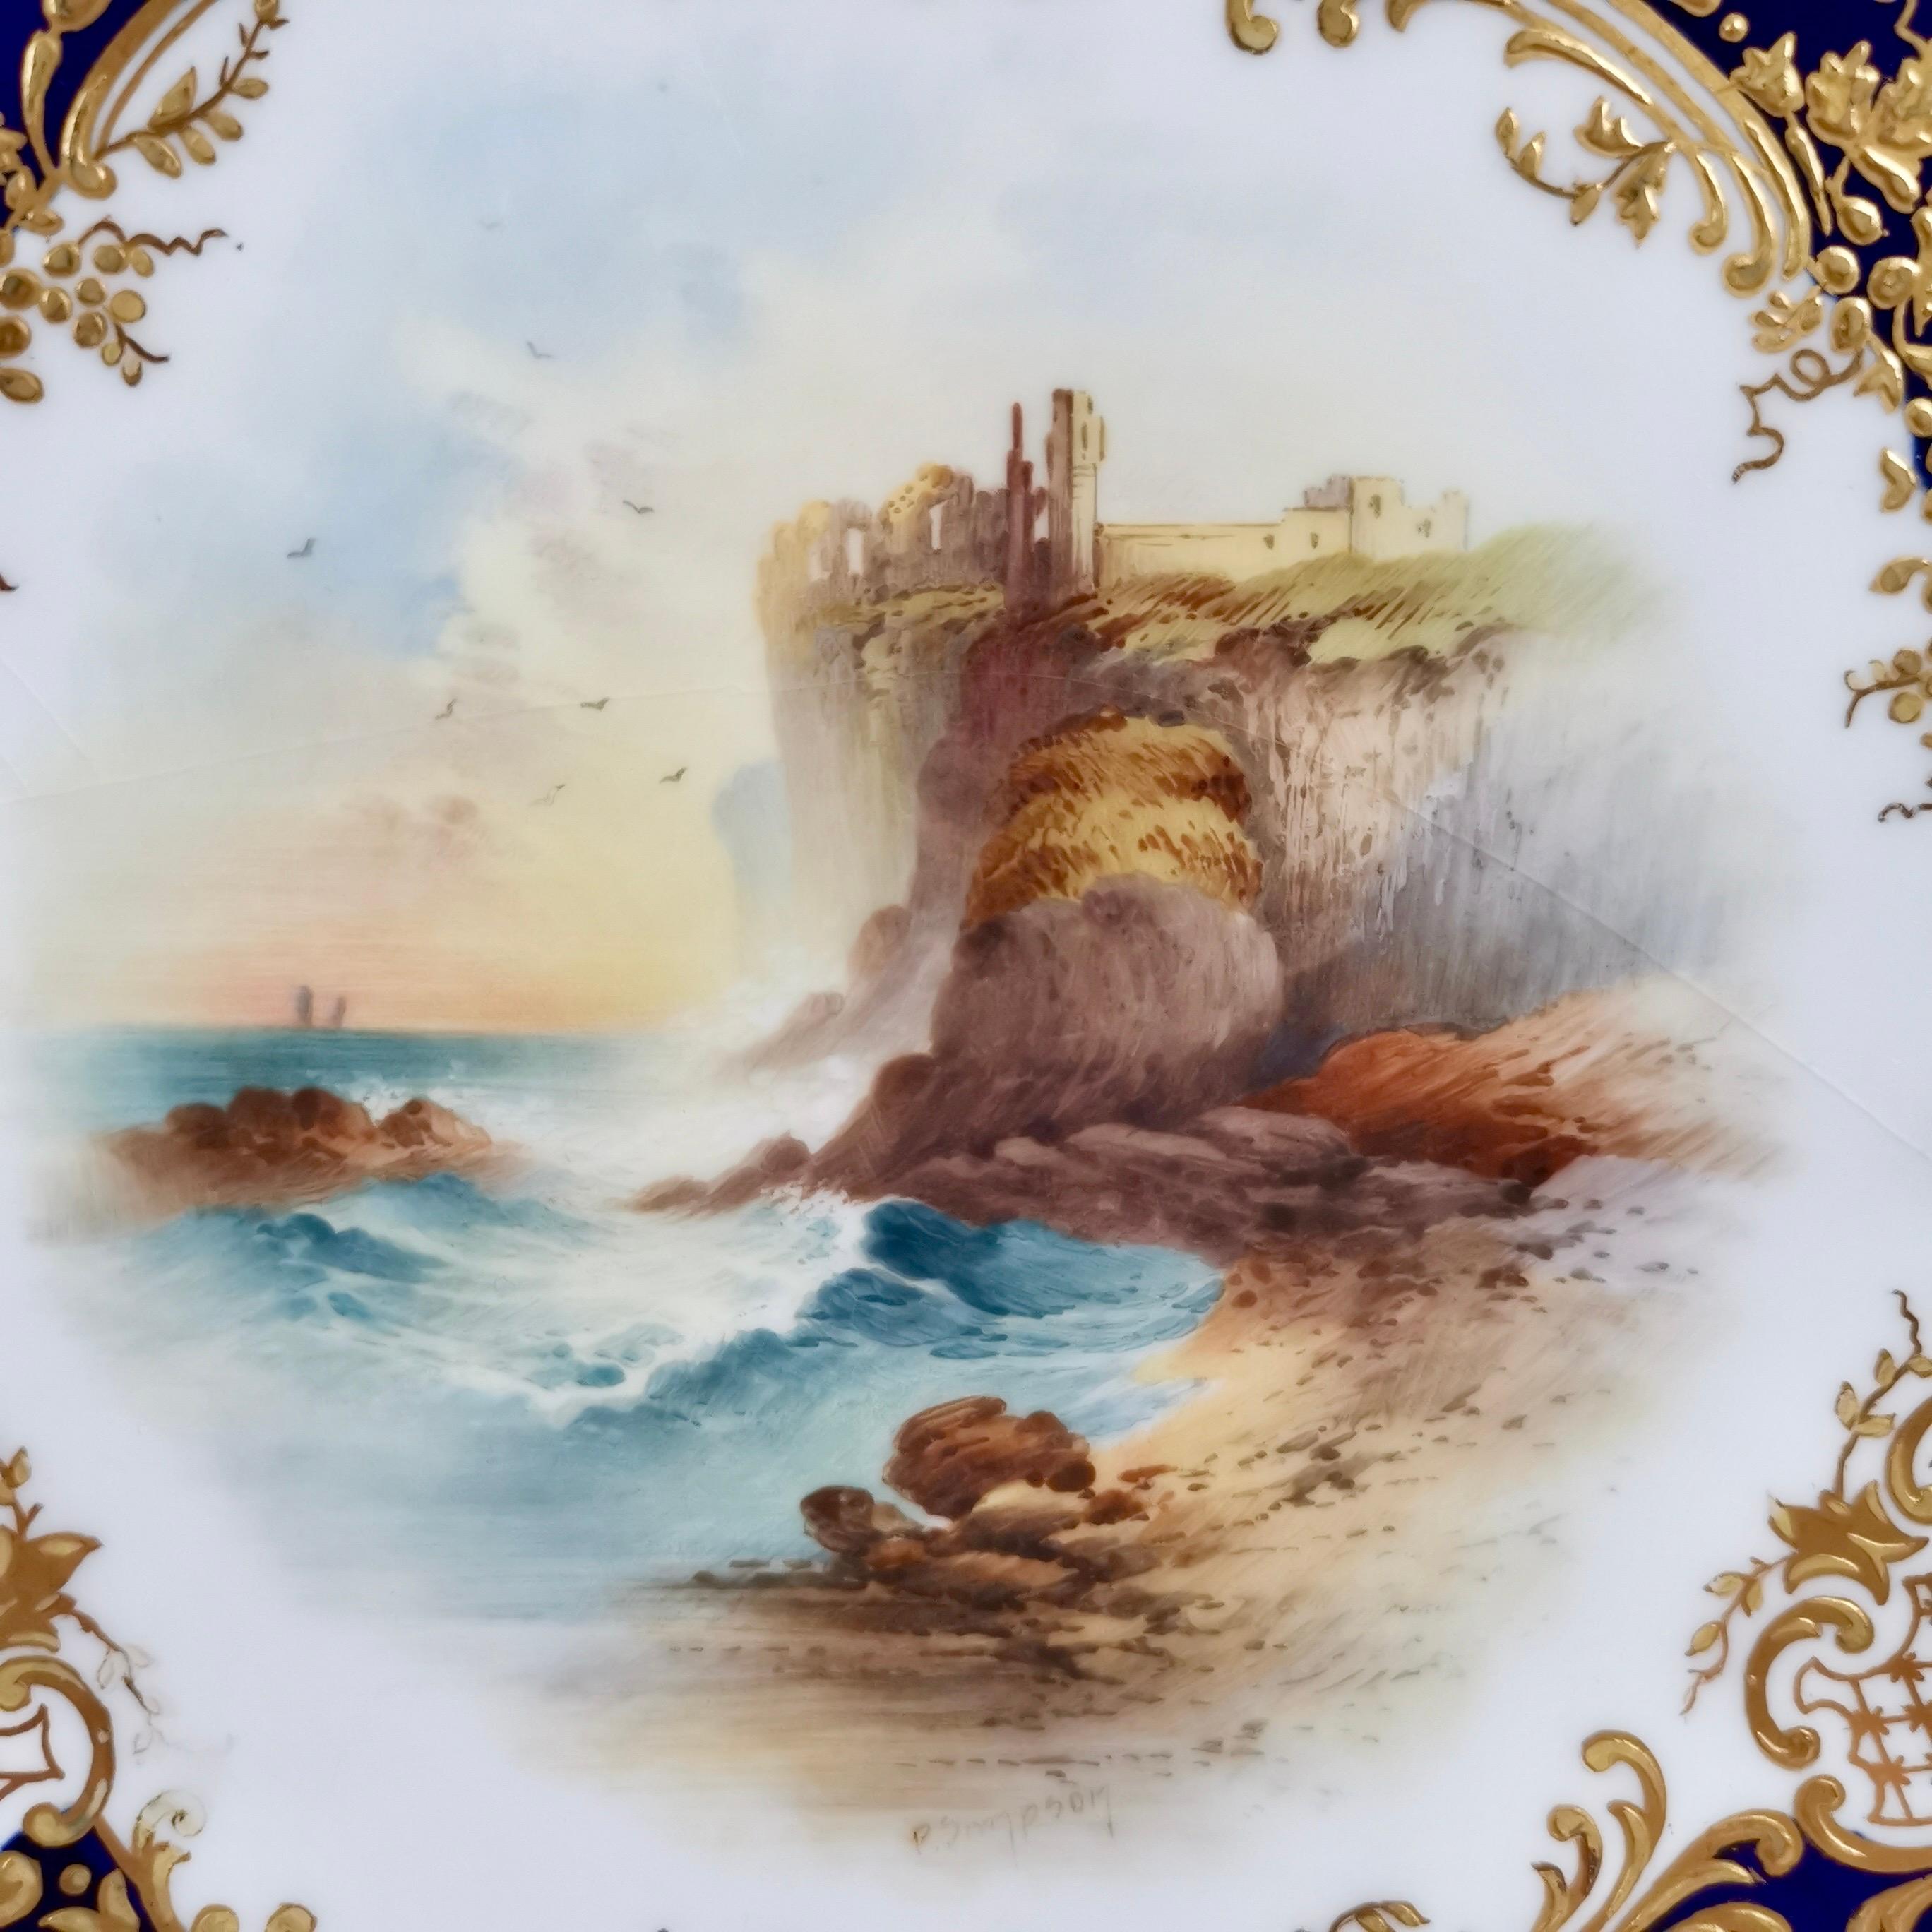 English Plate by Coalport for Thomas Goode, Tantallon Castle by P. Simpson, 1915